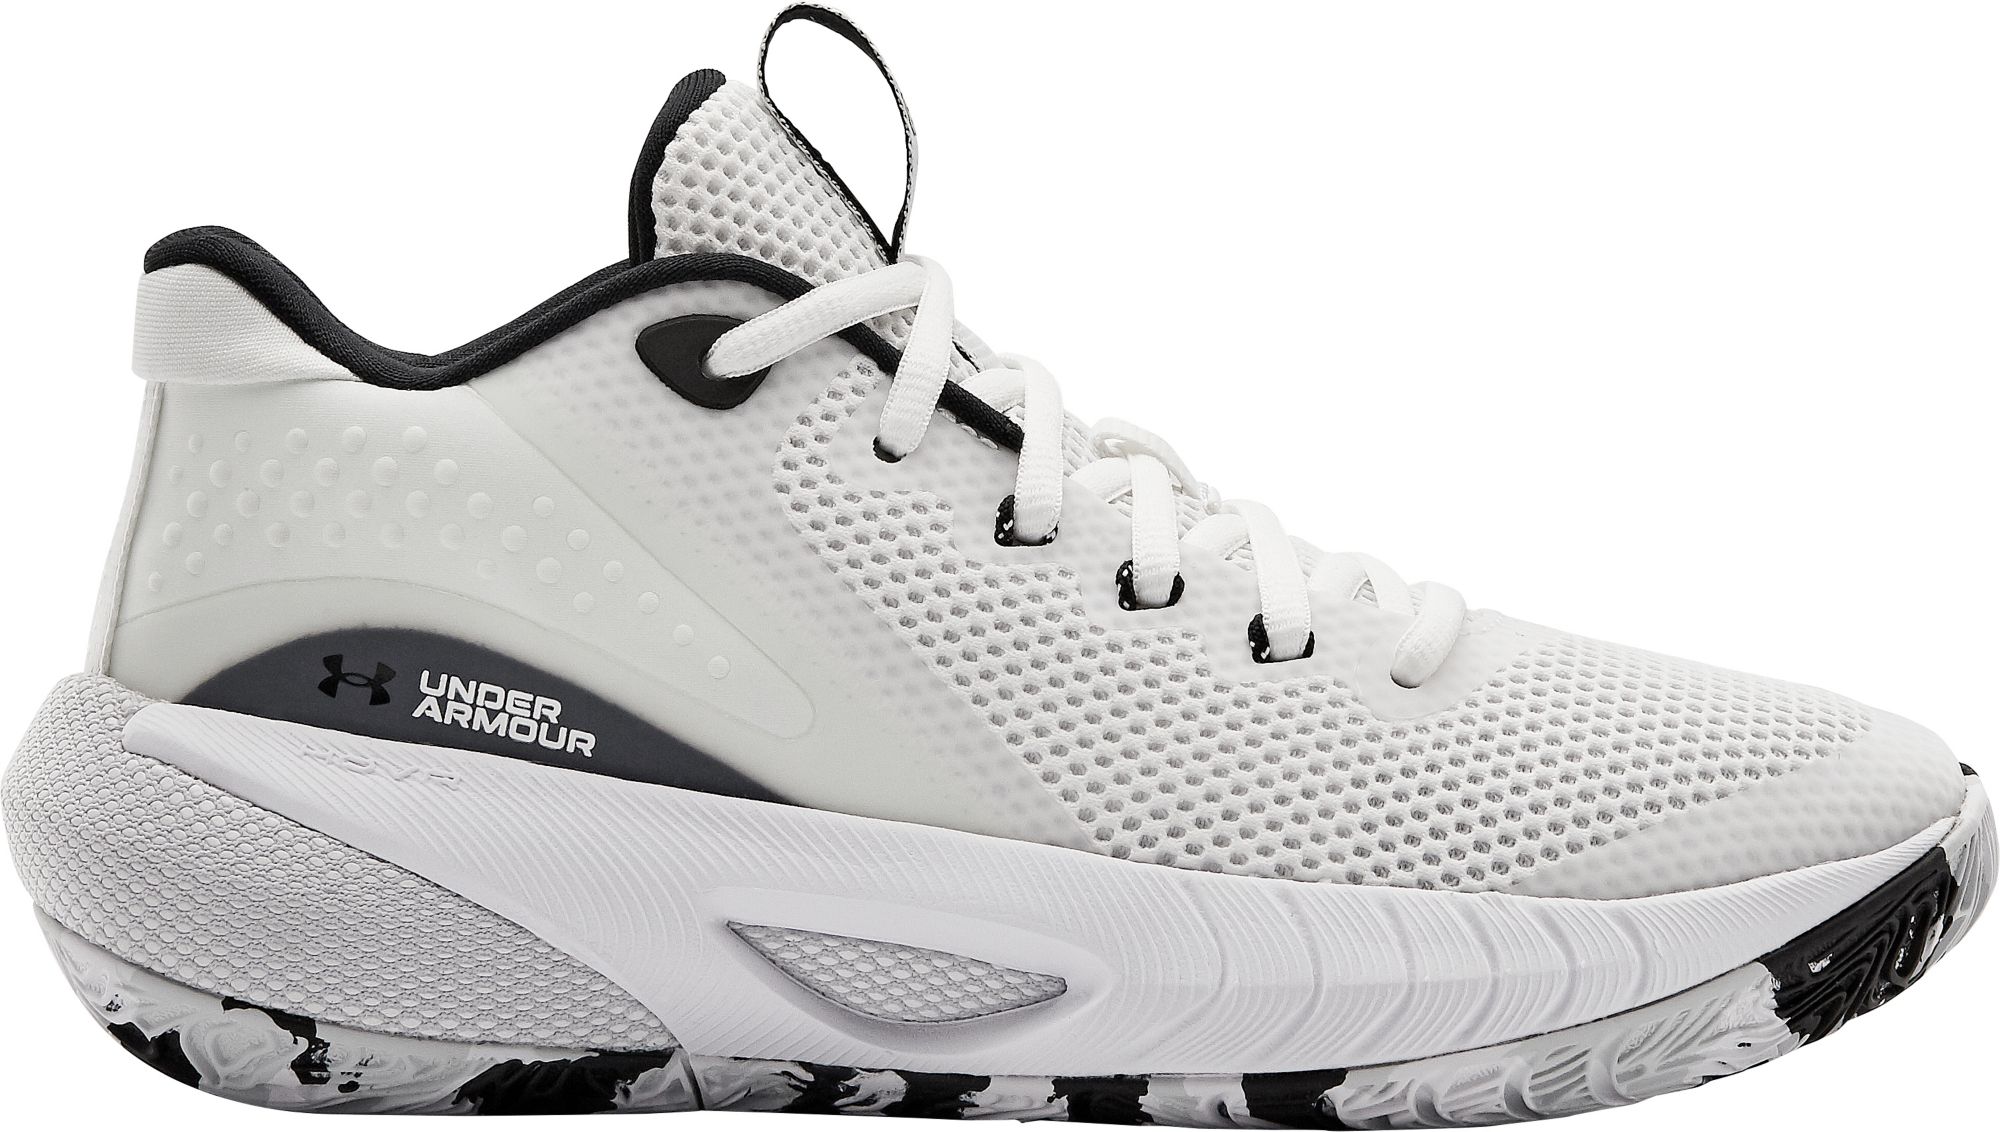 under armour women's basketball shoes